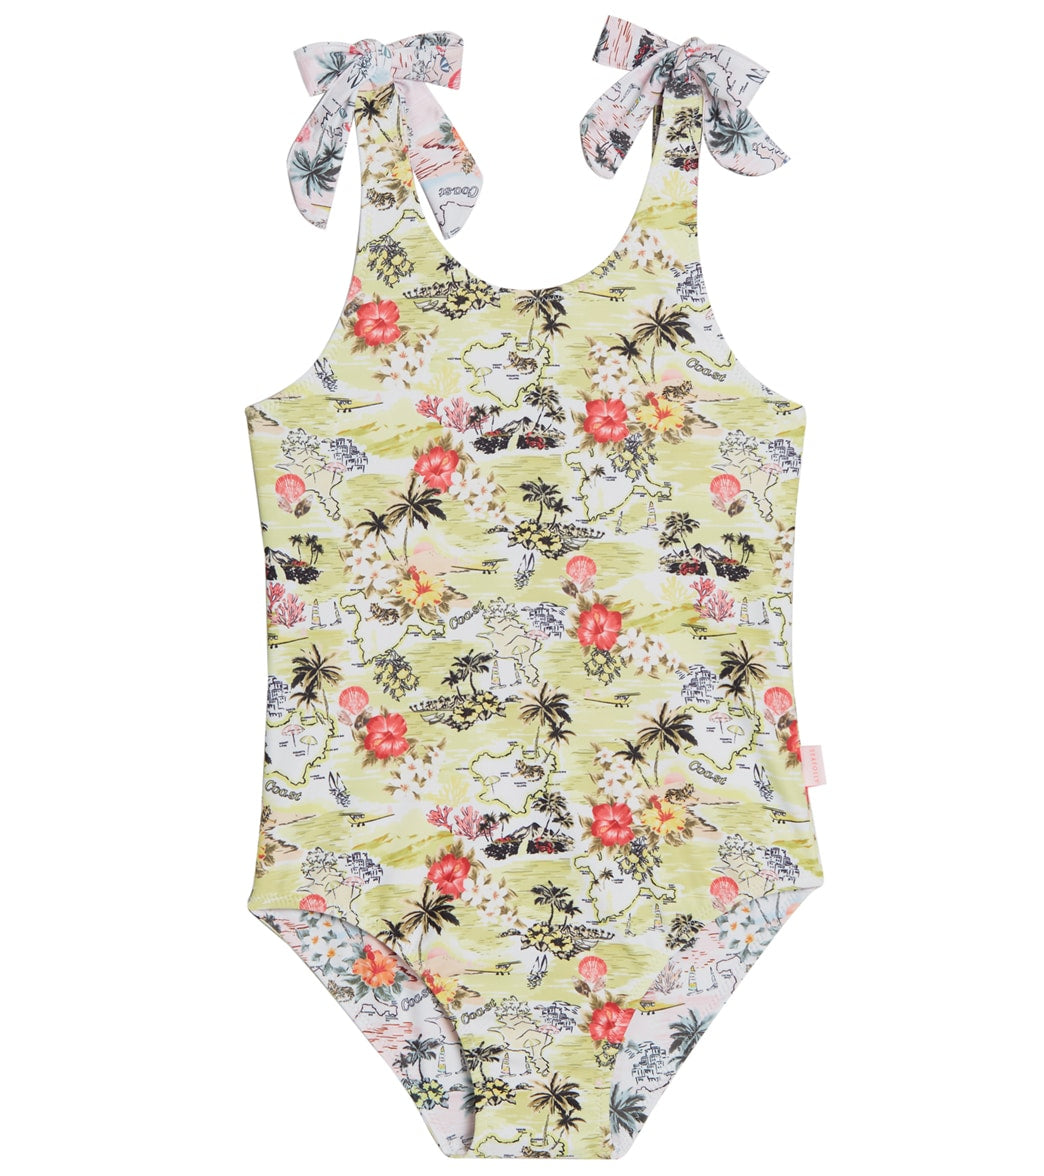 Seafolly Girls Coast To Coast Reversible One Piece Swimsuit (Baby, Toddler, Little Kid)